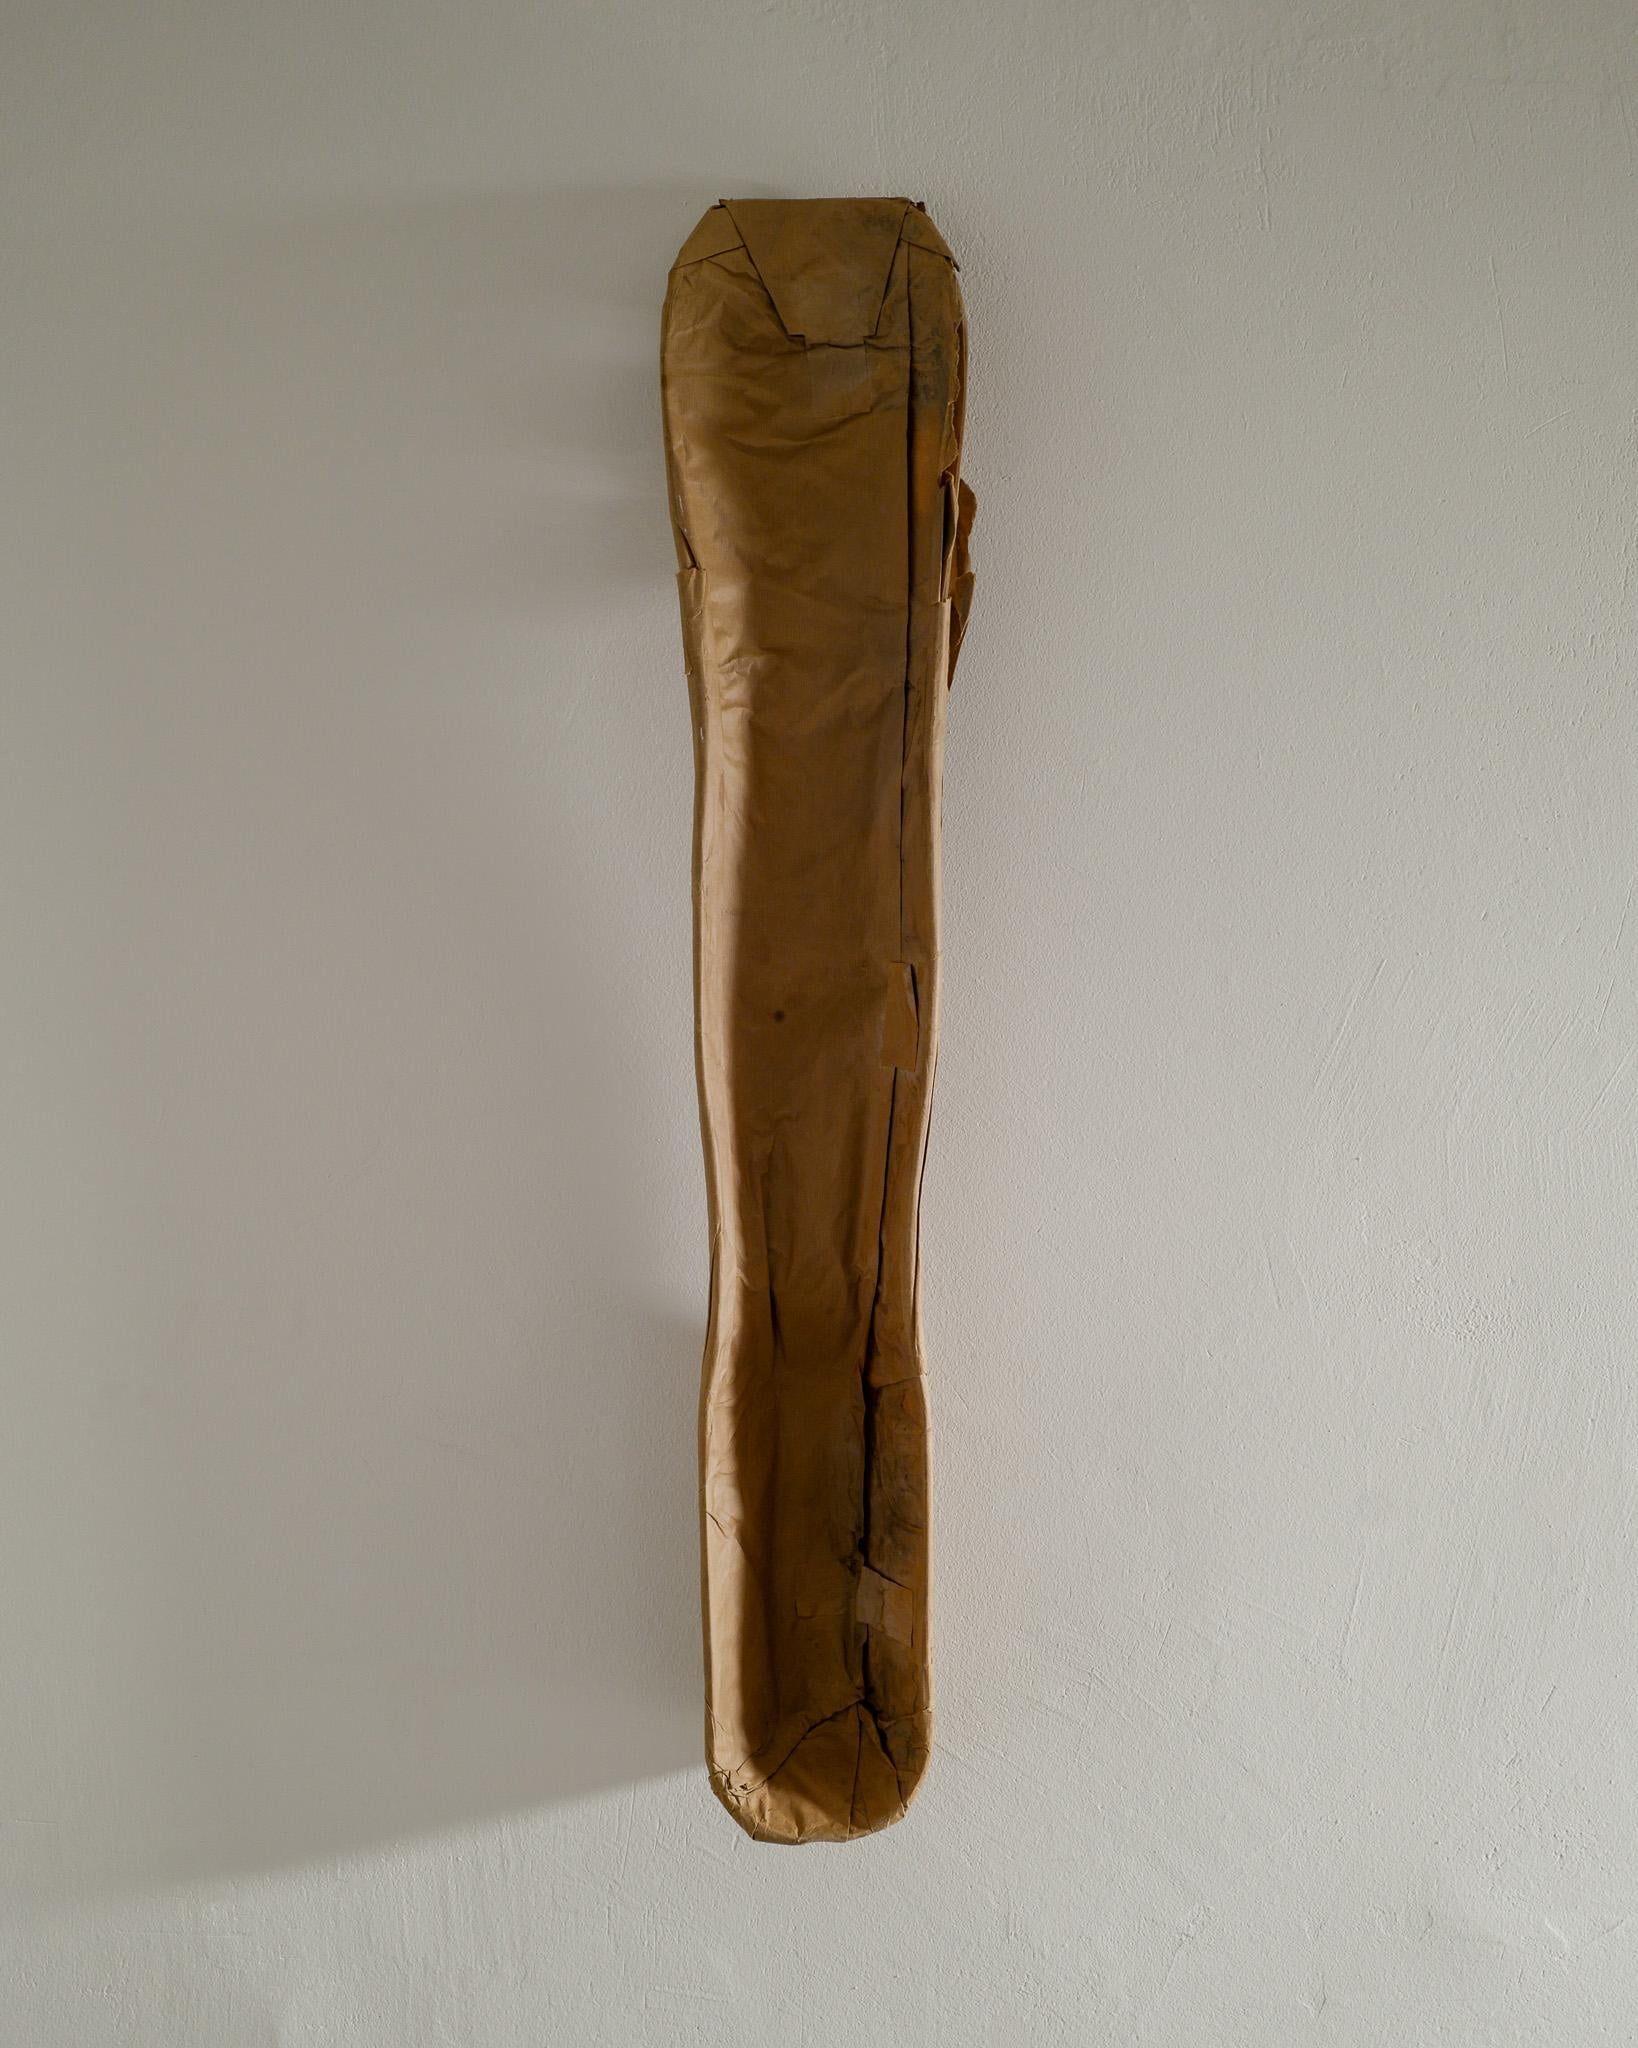 Rare leg splint by Charles & Ray Eames in molded plywood and its unopened original wrapping produced by Evans 1943. A true mid century collectible piece perfect as a wall sculpture etc. 

Height: 42 in (106.68 cm) Width: 8 in (20.32 cm) Depth: 4 in